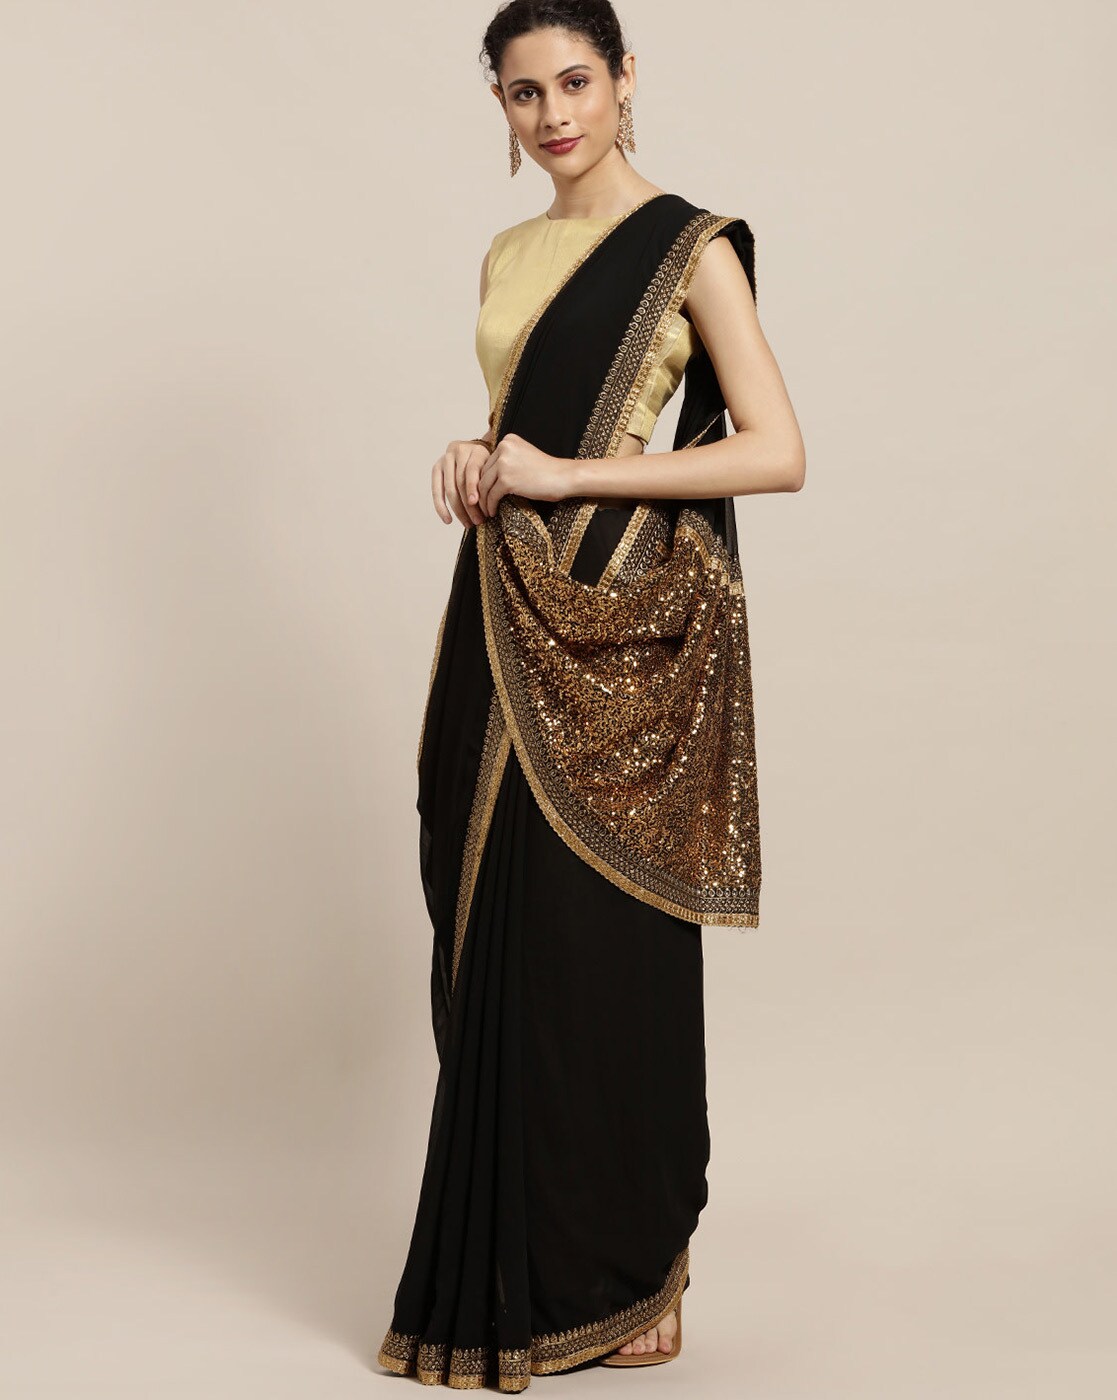 How To Look Slim And Graceful In An Indian Suit? | saree.com by Asopalav